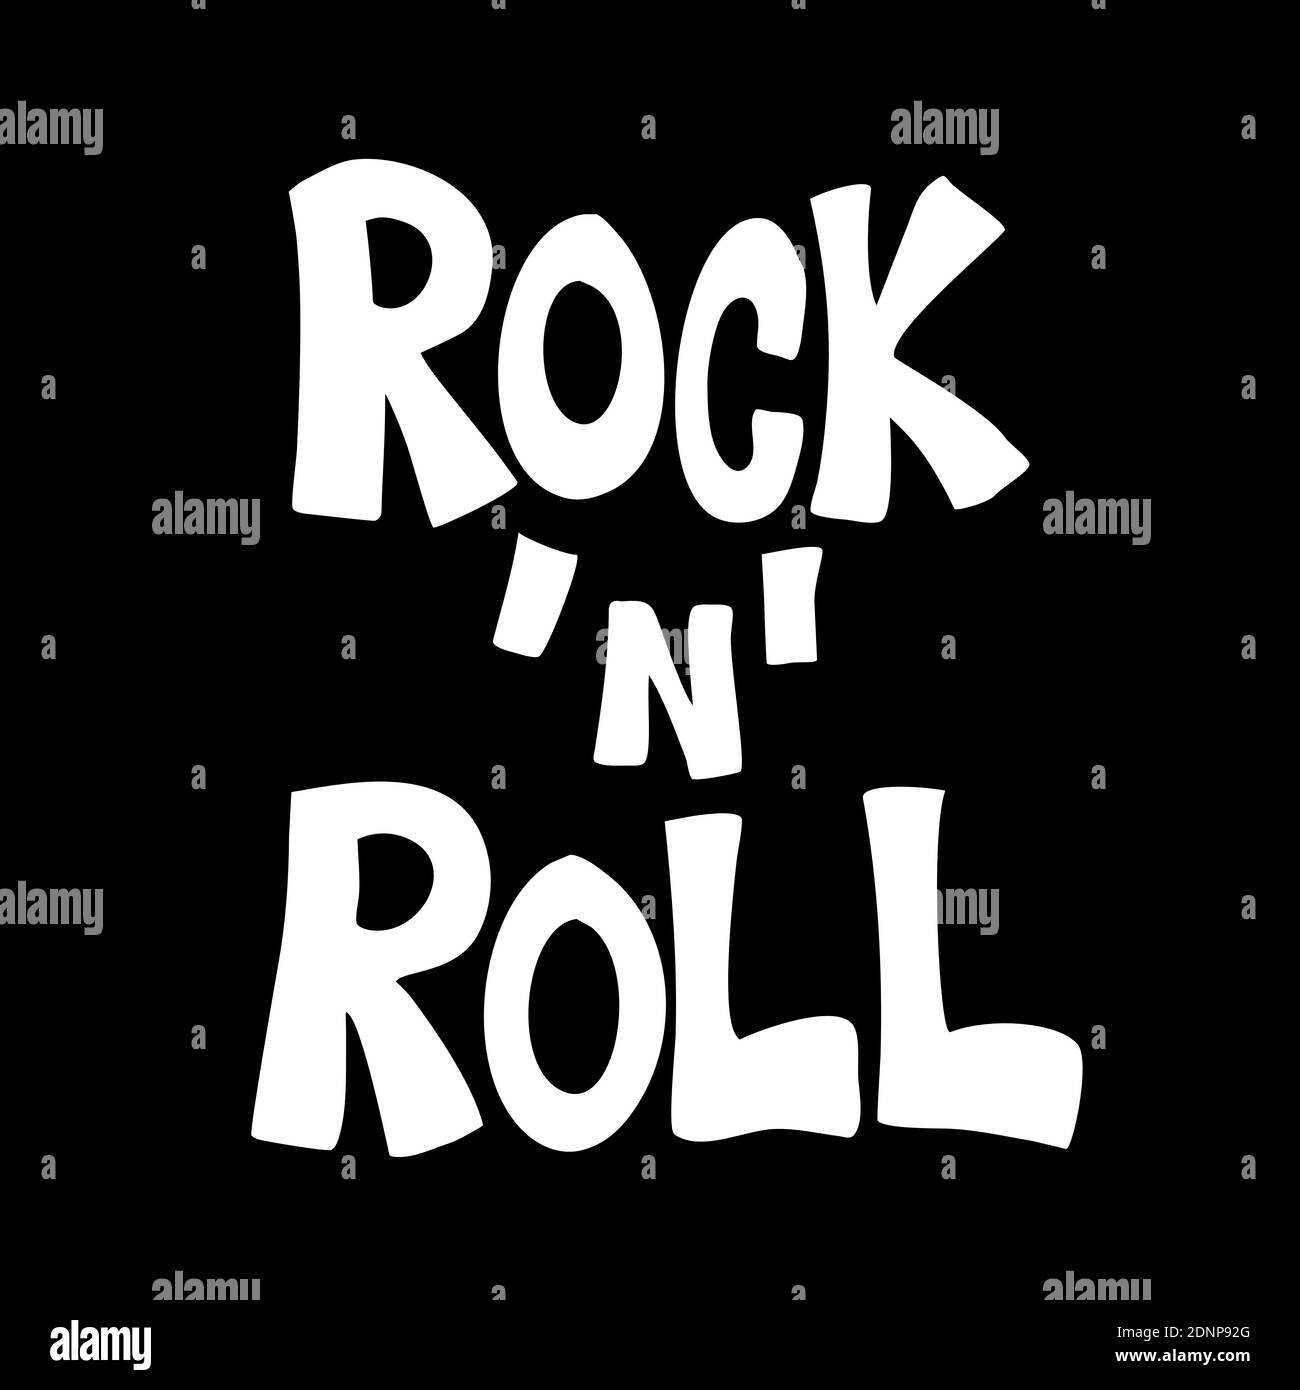 Rock and roll. Genre of popular music. Hand-written typography and font. vector illustration. Stock Photo